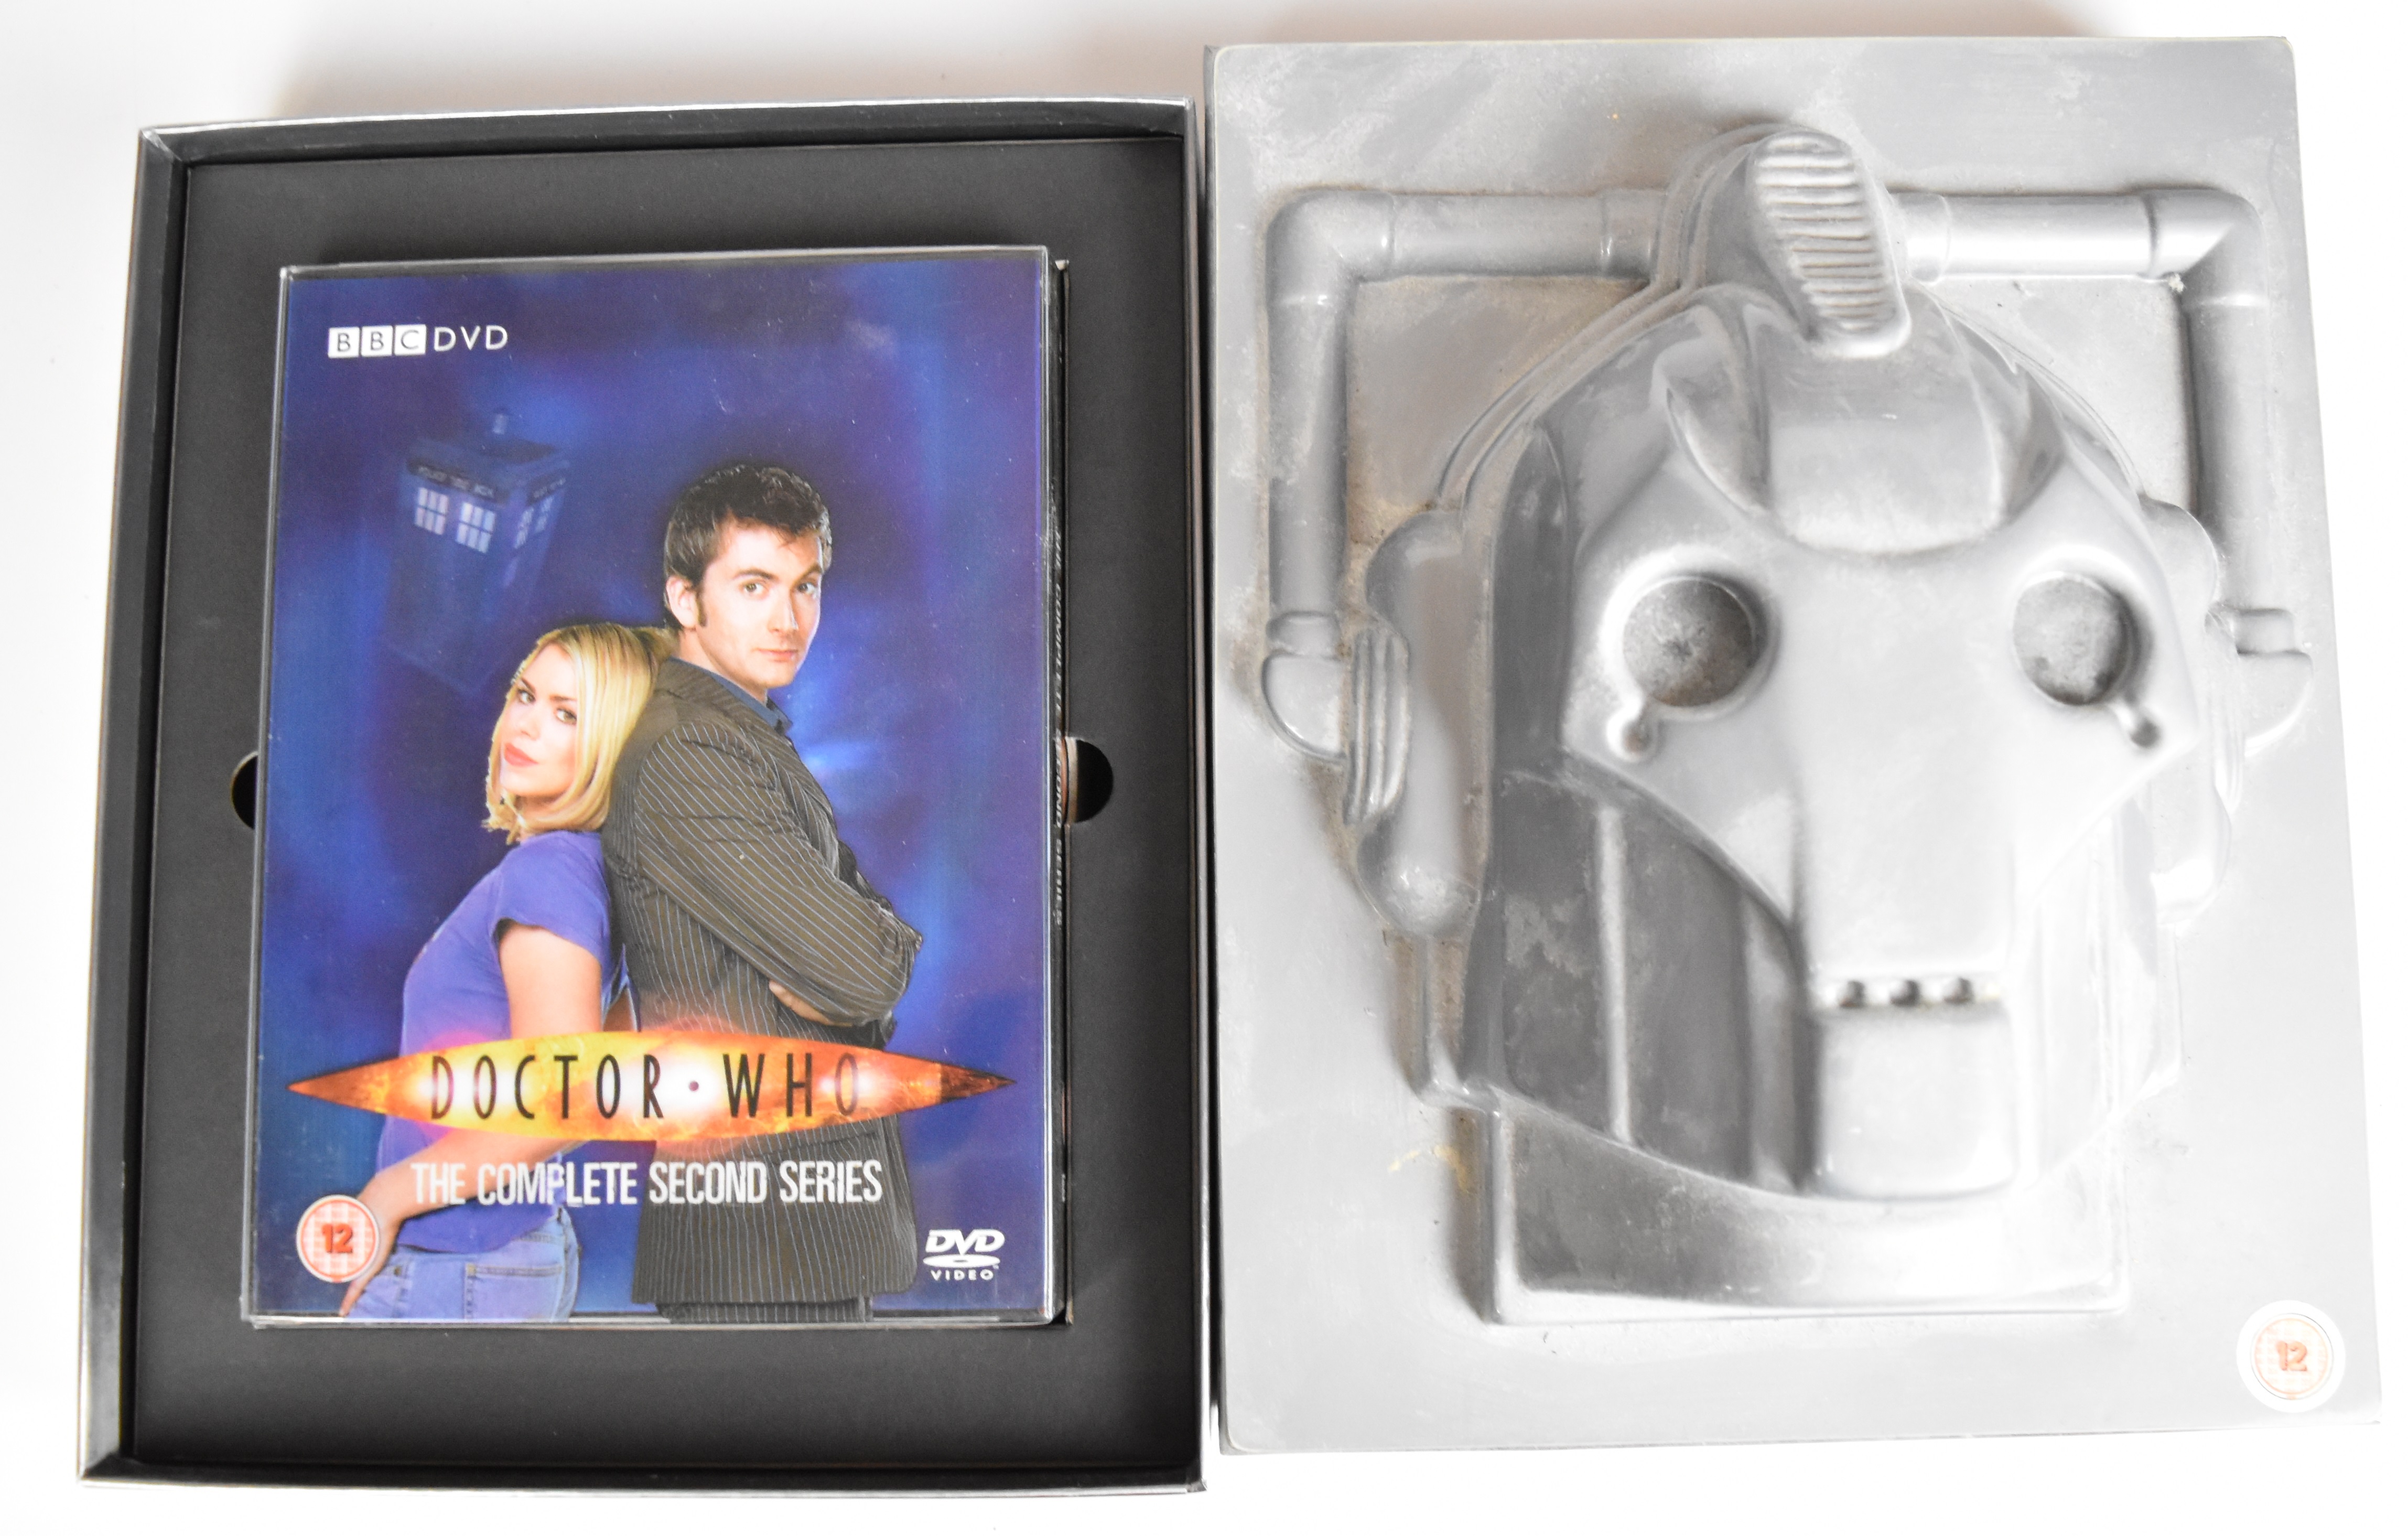 Forty-seven Doctor Who multi disc DVD boxed sets including TV specials and related titles, - Image 2 of 6